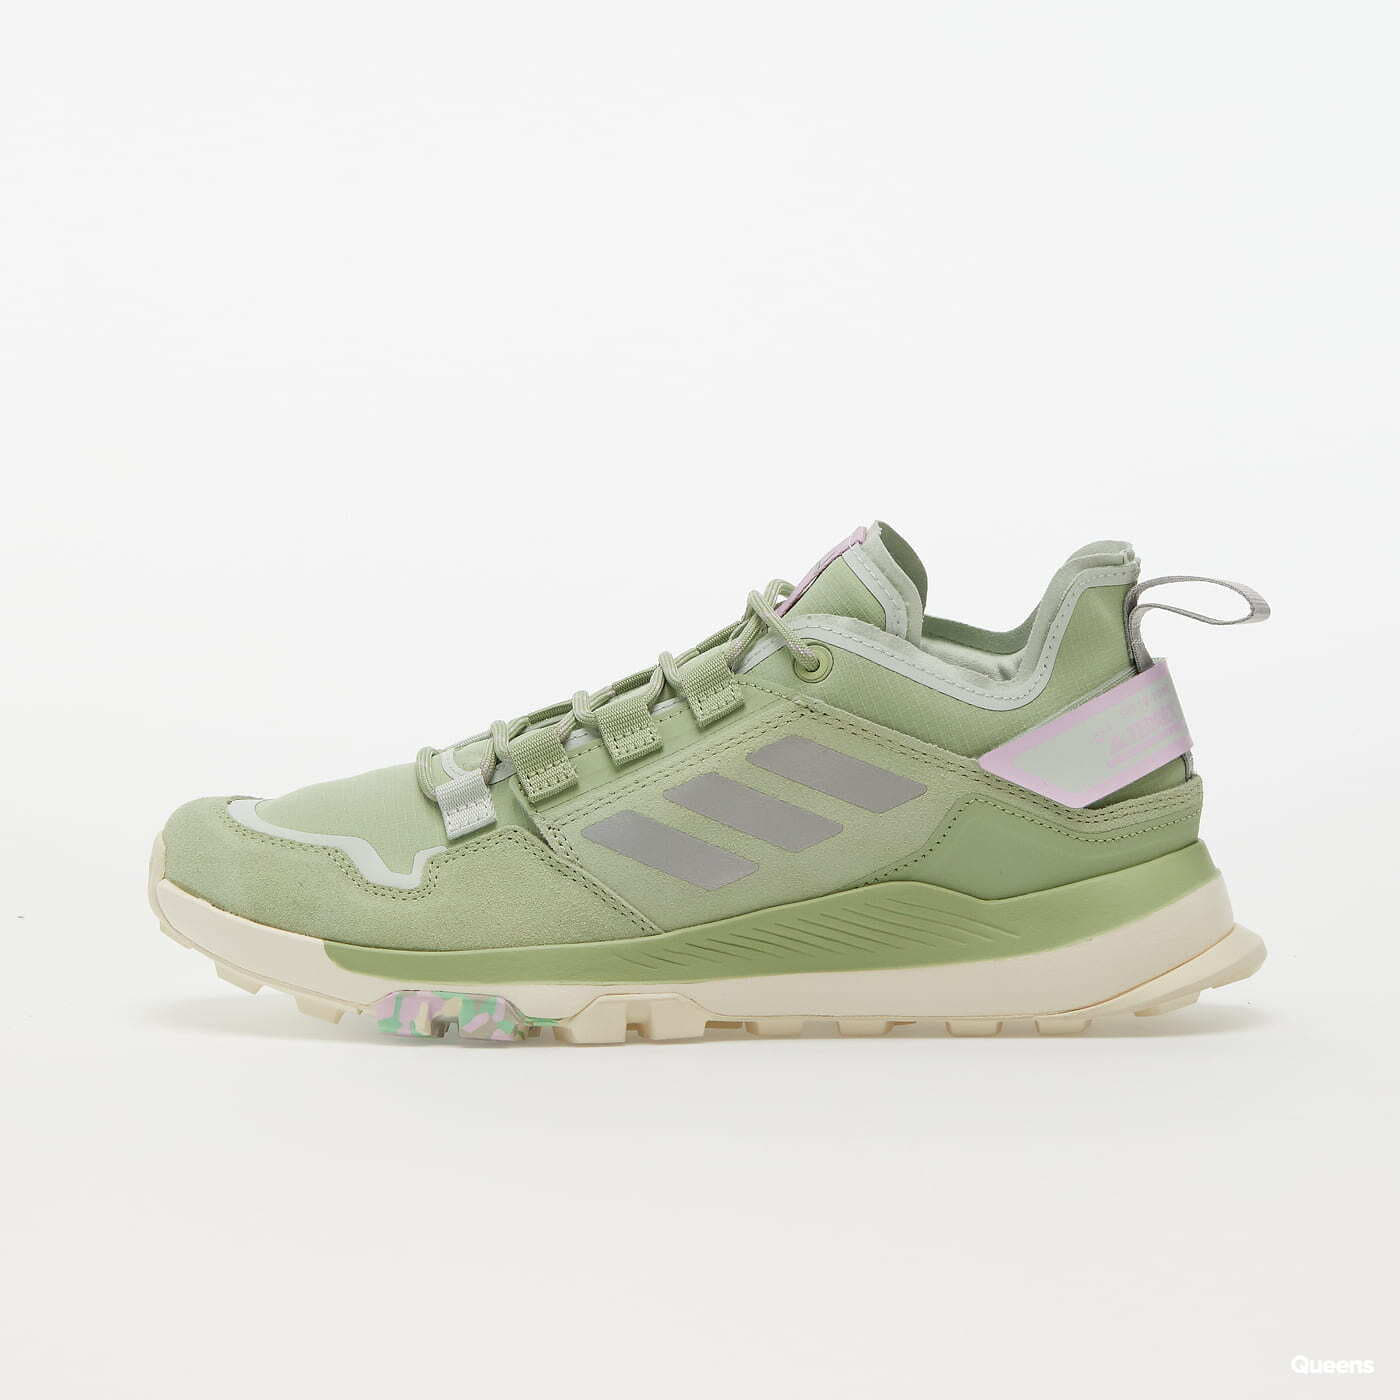 Women's sneakers and shoes adidas Performance Terrex Hikster W Magic Lime/ Silver Metalic/ Blitz Lilac